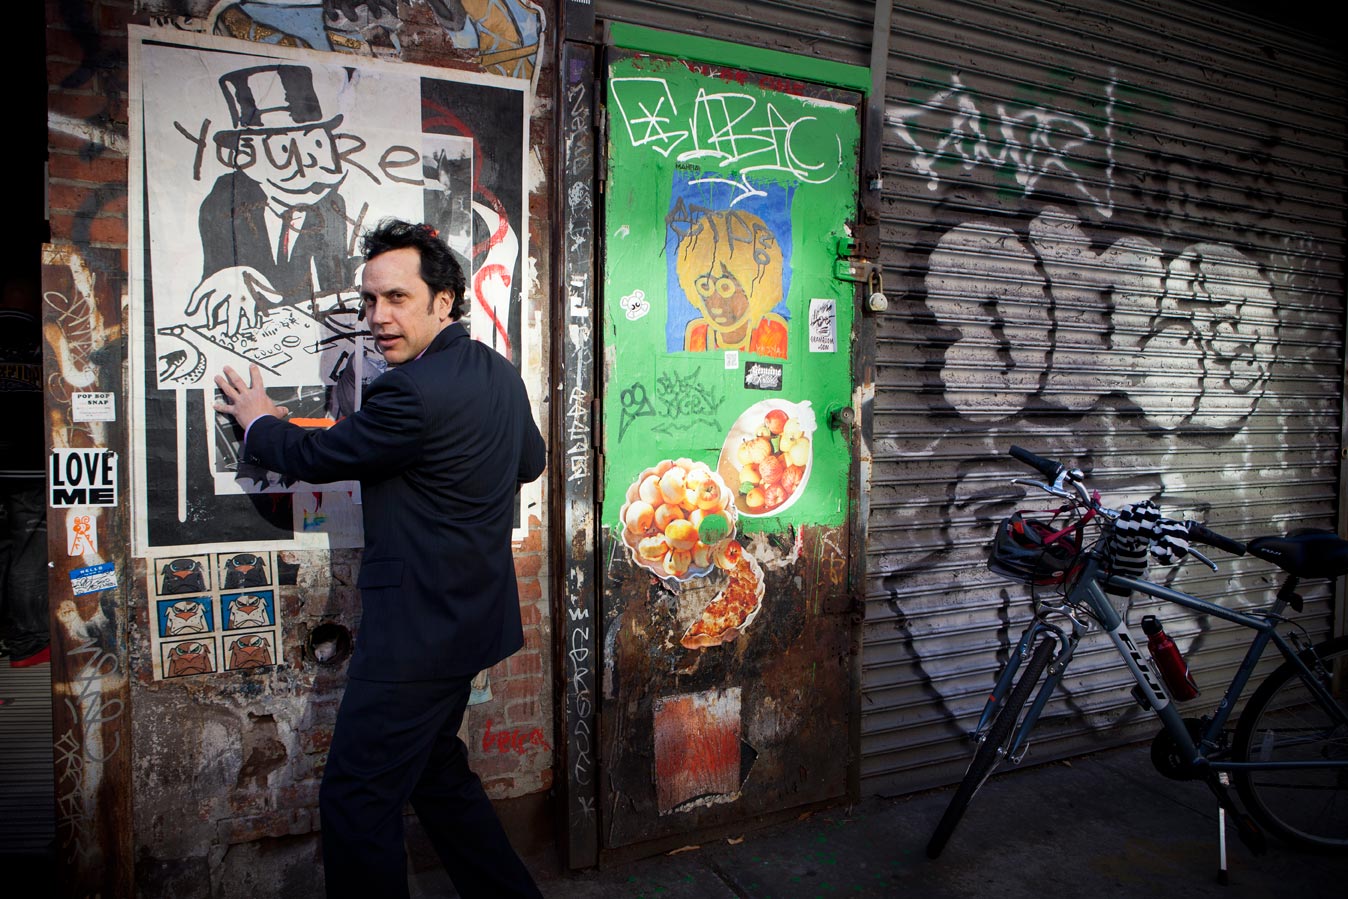 editorial photographer Midwest - Michael Melcher, author of The Creative Lawyer, stands next to a wall of Graffiti in NYC